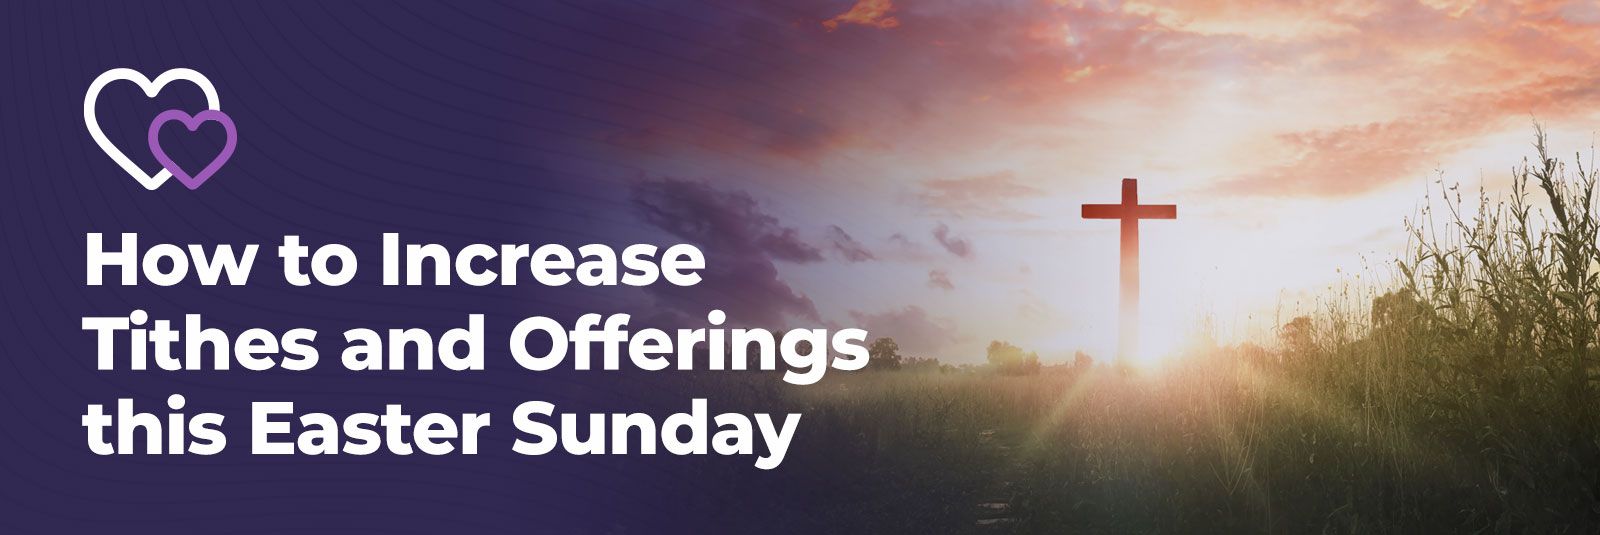 How to Increase Tithes and Offerings this Easter Sunday